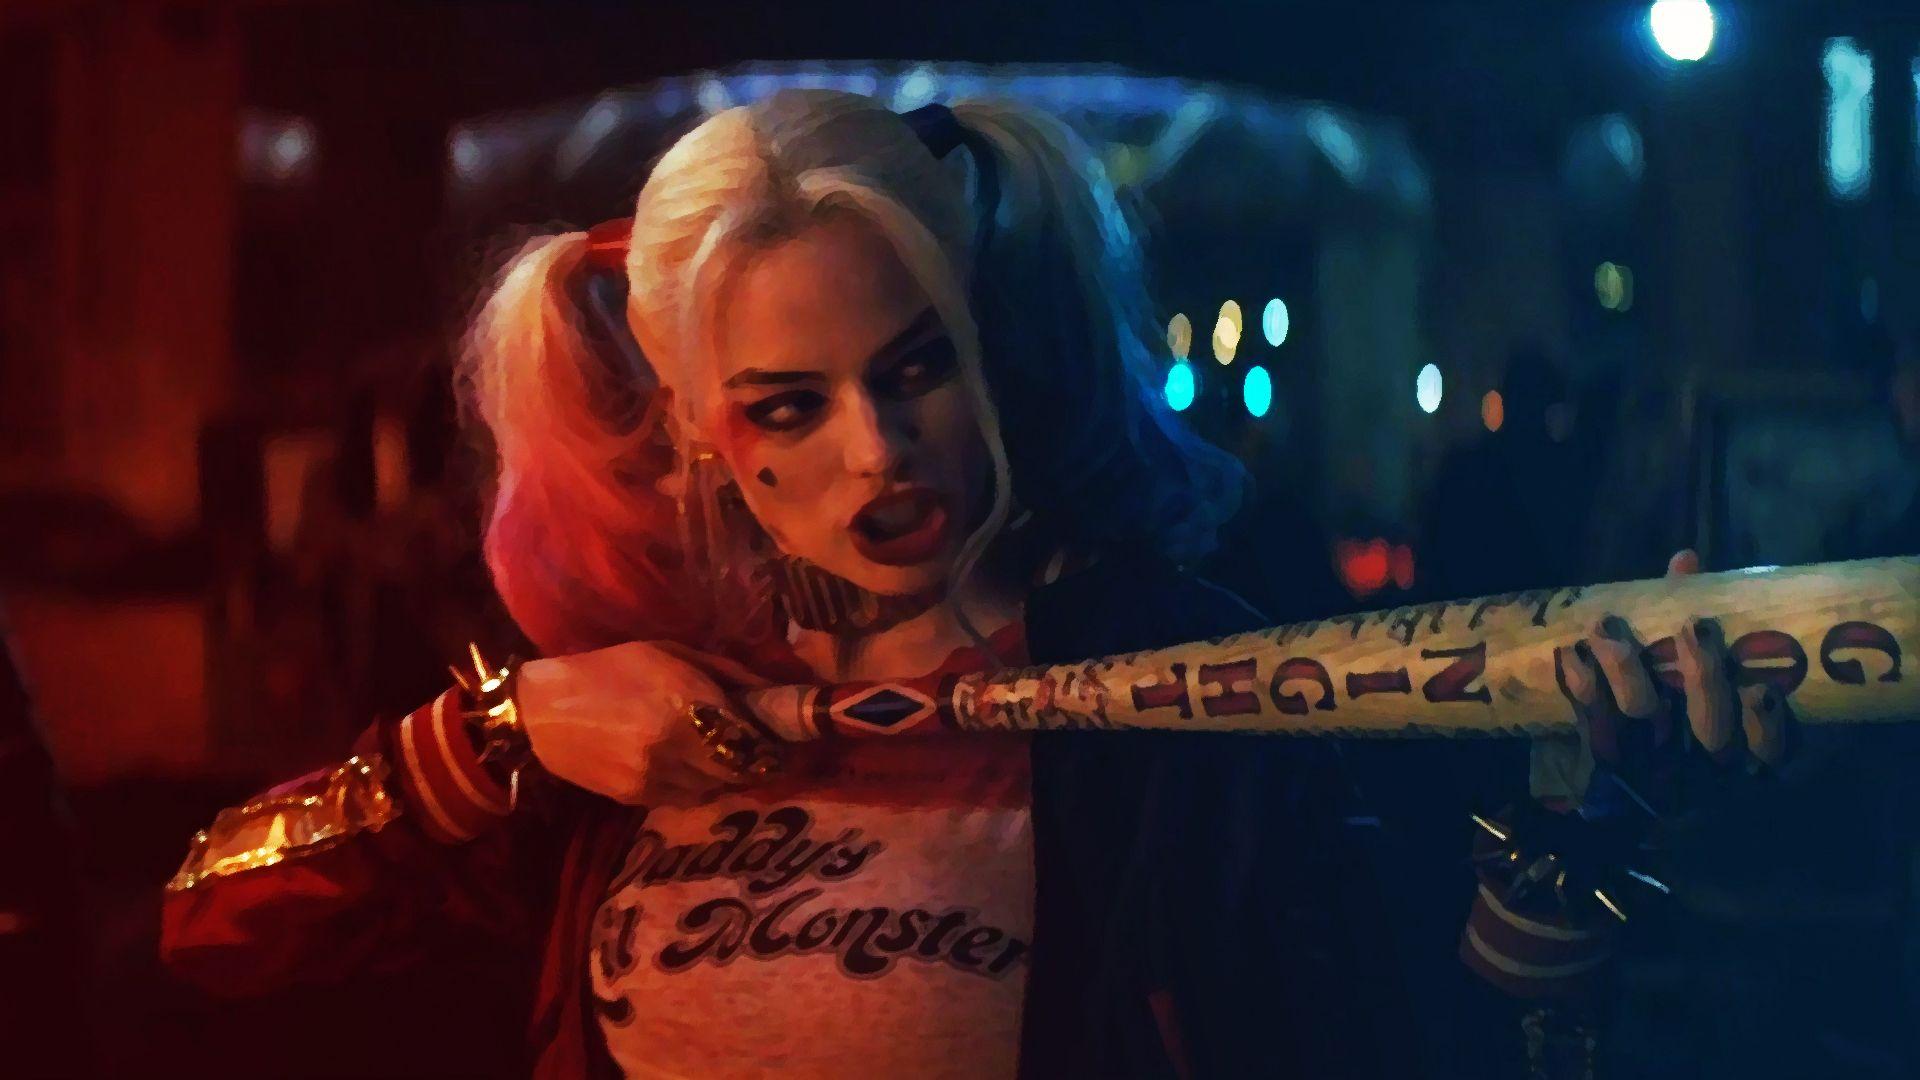 Harley Quinn edit I made from the Suicide Squad trailer 1920x1080